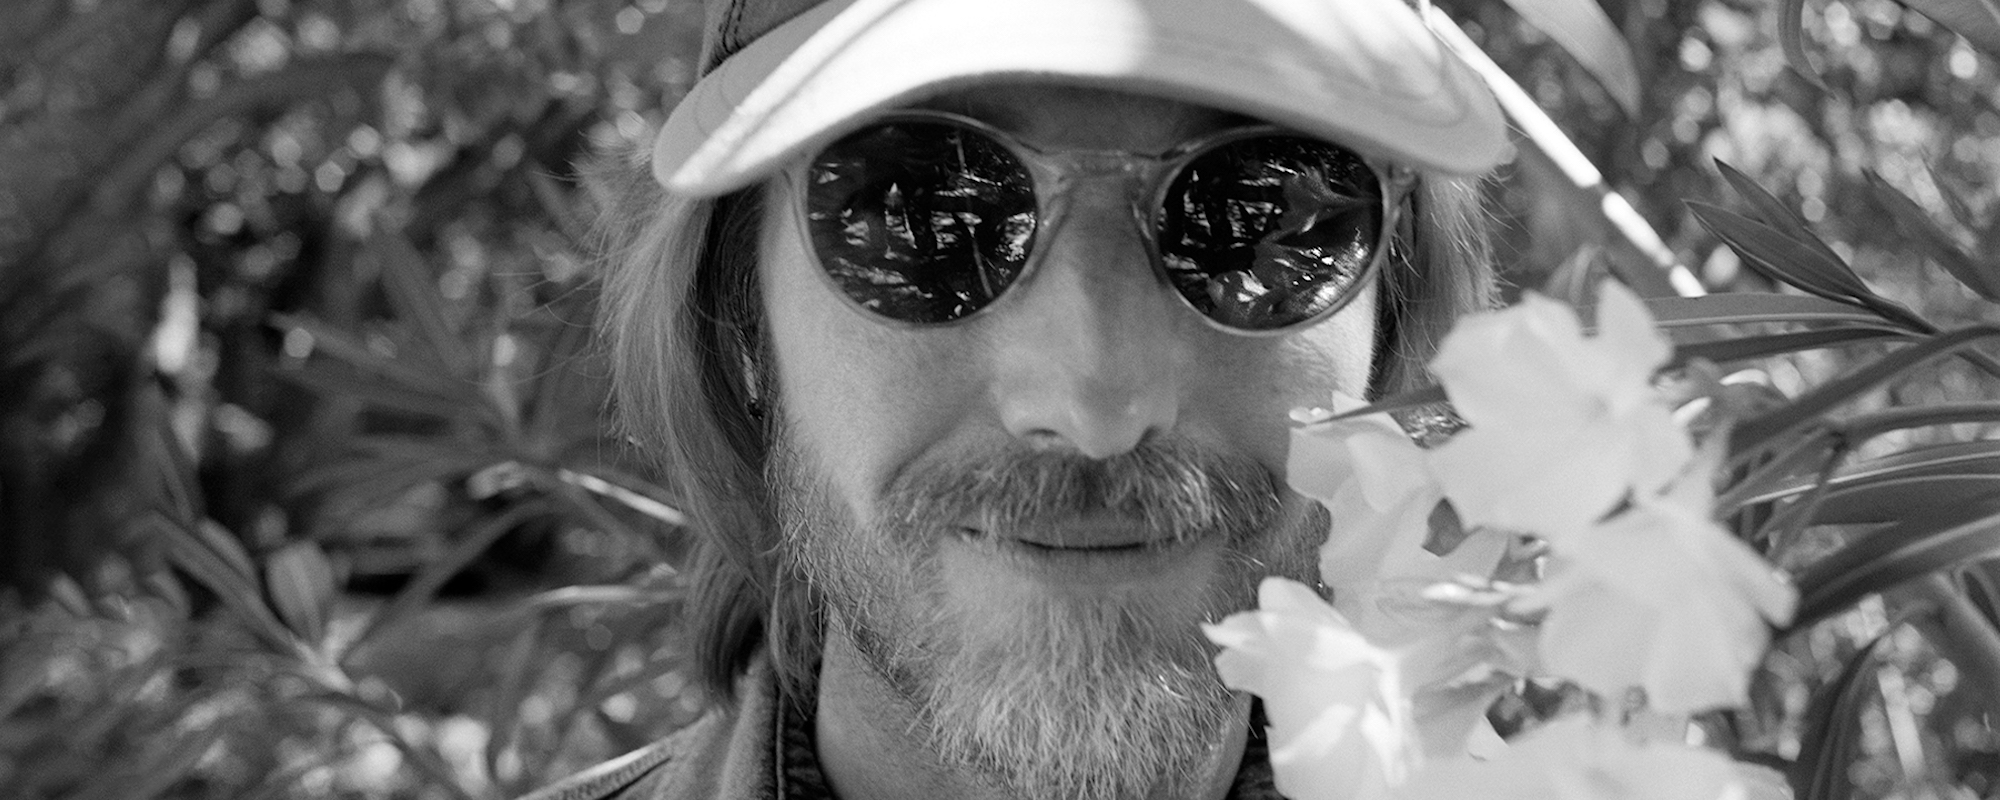 The 12 Songs that Define Tom Petty’s Career